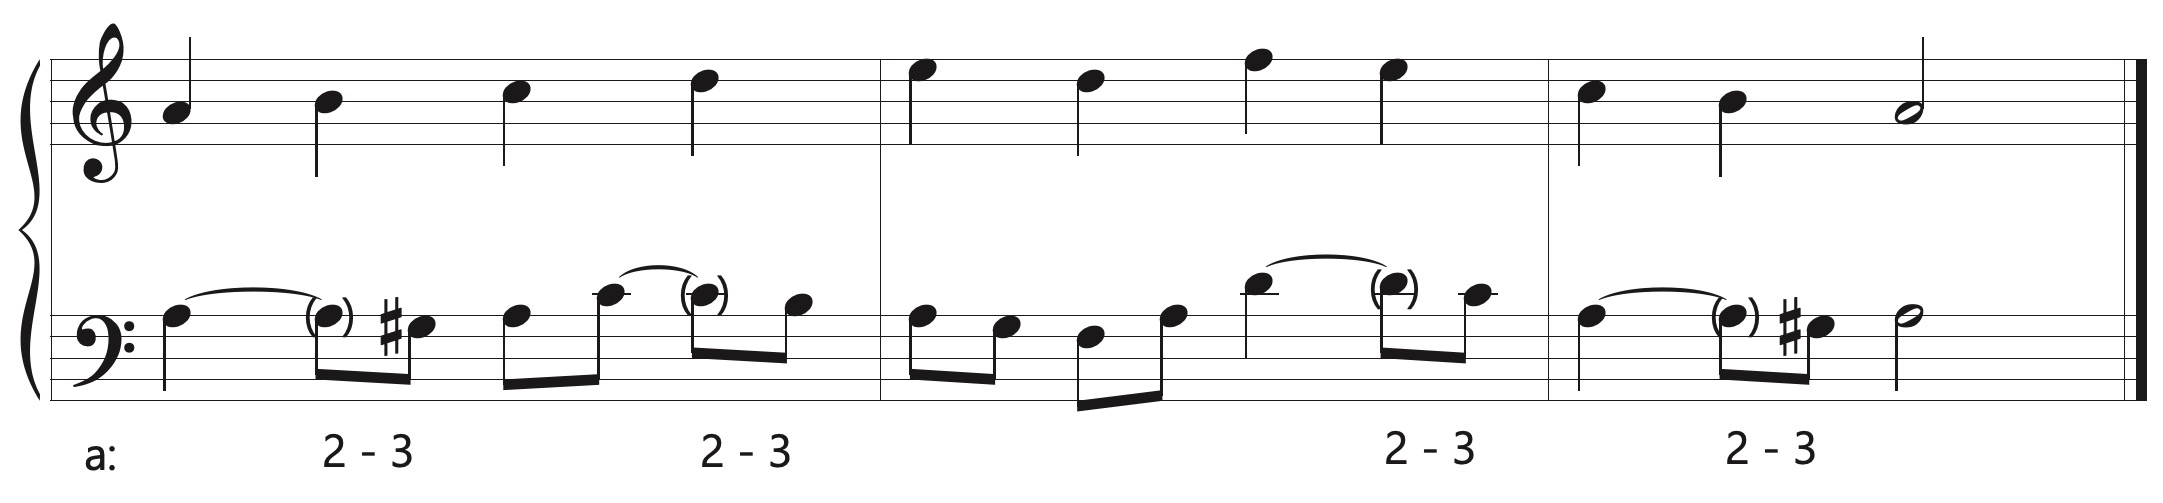 bass suspensions example